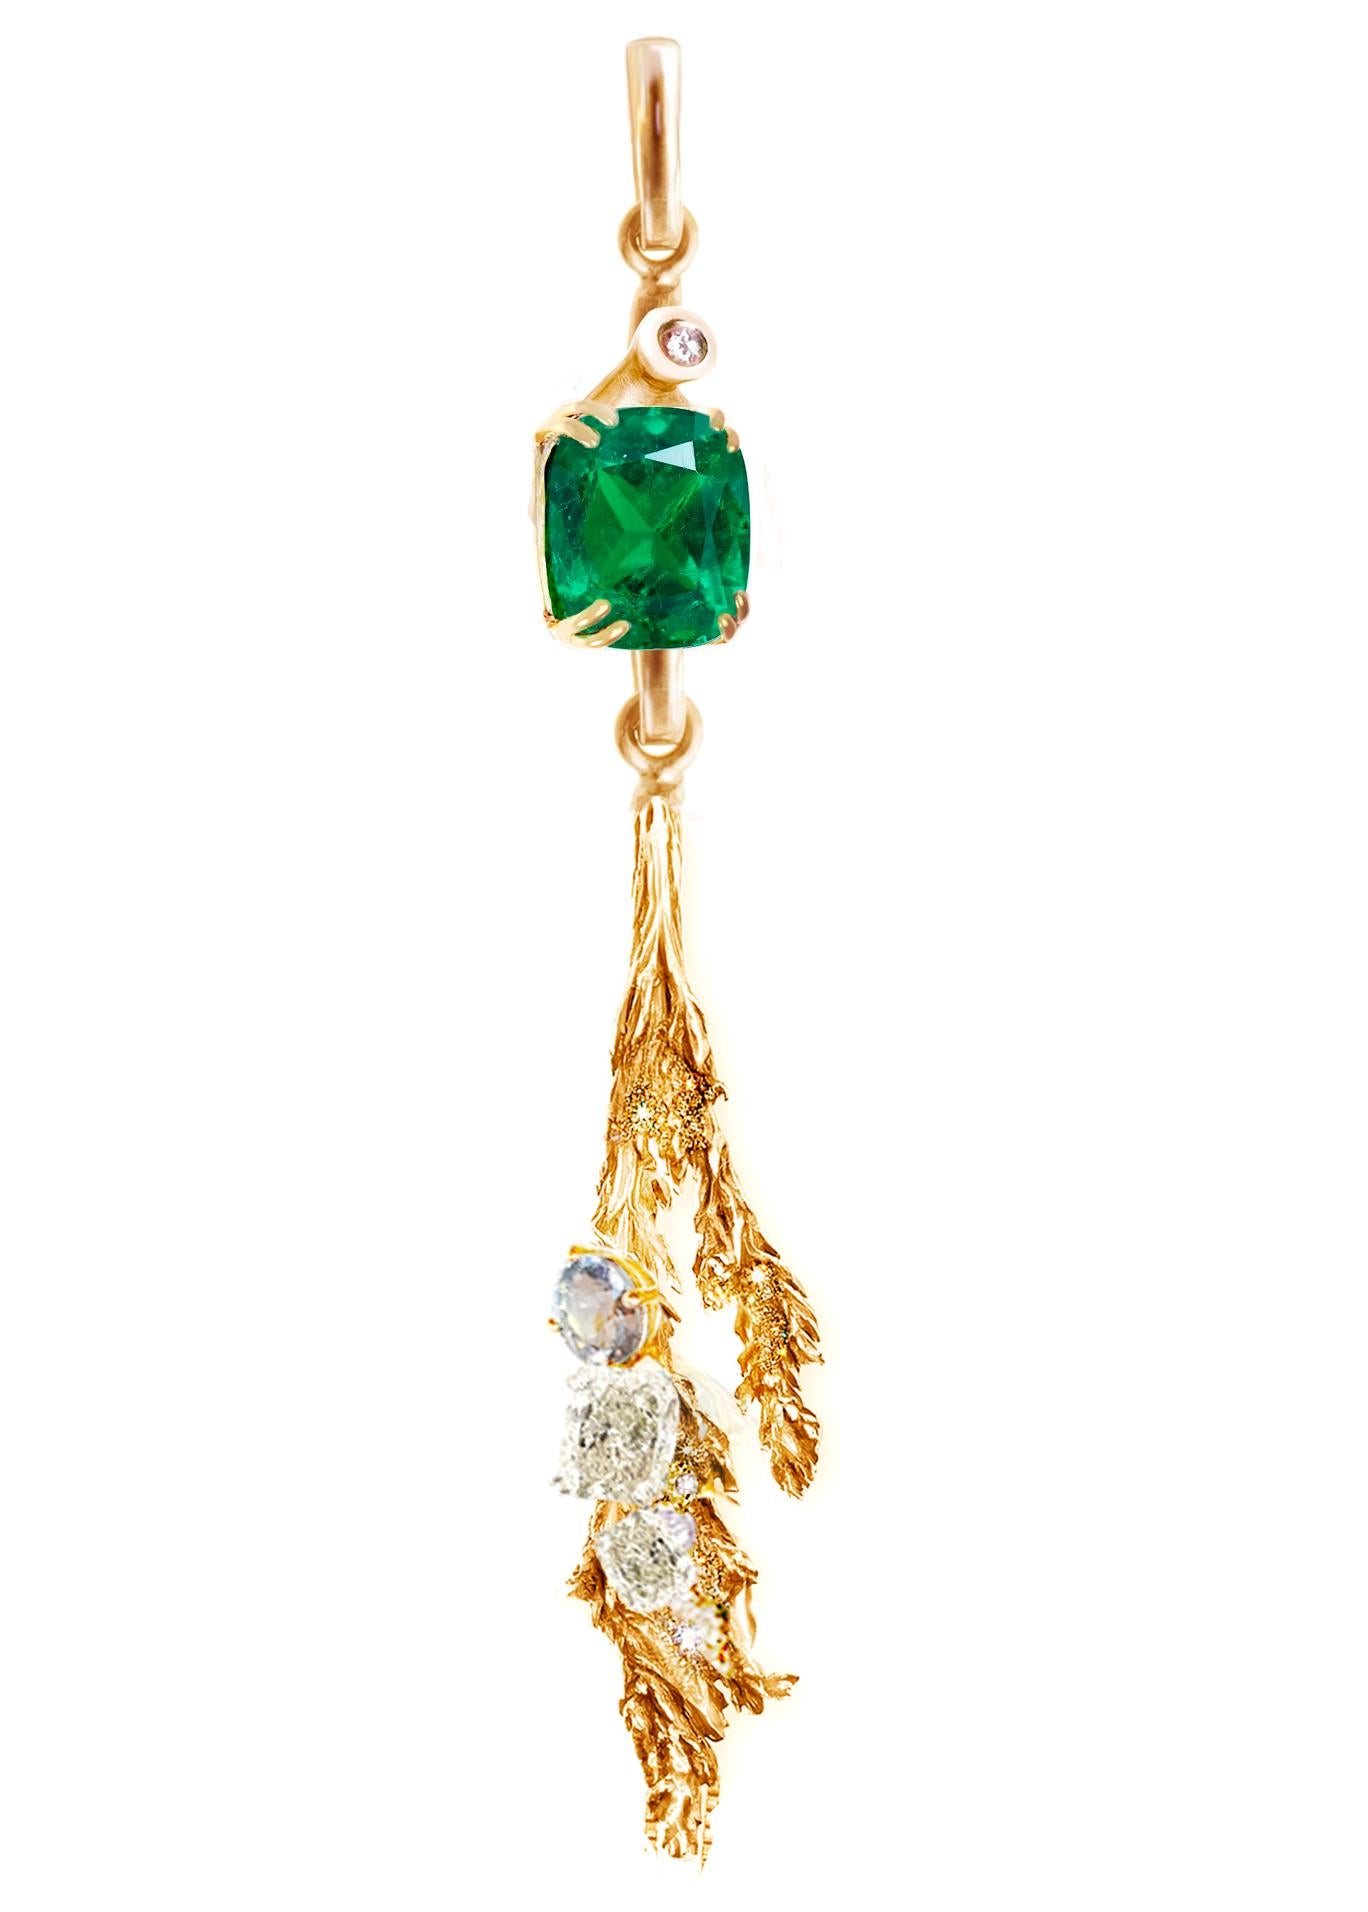 This 6 cm long Juniper pendant necklace is made of 18 karat rose gold and adorned with a 1.29 carat SSEF certified emerald, diamonds, and a sapphire. The green emerald is in octagonal cut, measures 6.94 x 6.15 x 4.75 mm. The two diamonds are SI and